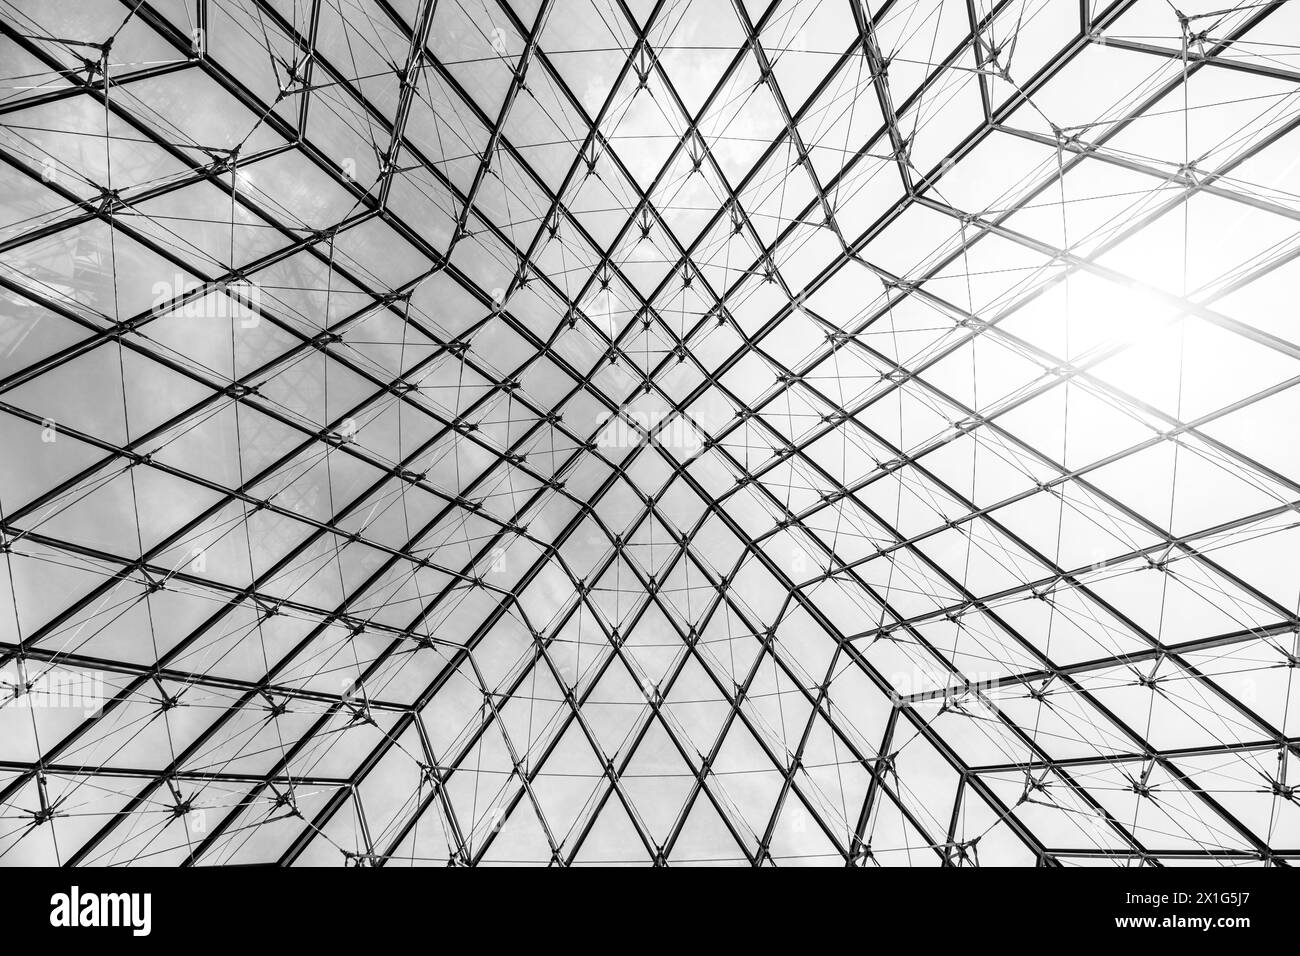 Underneath the Louvre Pyramid, the intricate glasswork contrasts against a blue sky on a clear day in Paris, France. Black and white image. Stock Photo